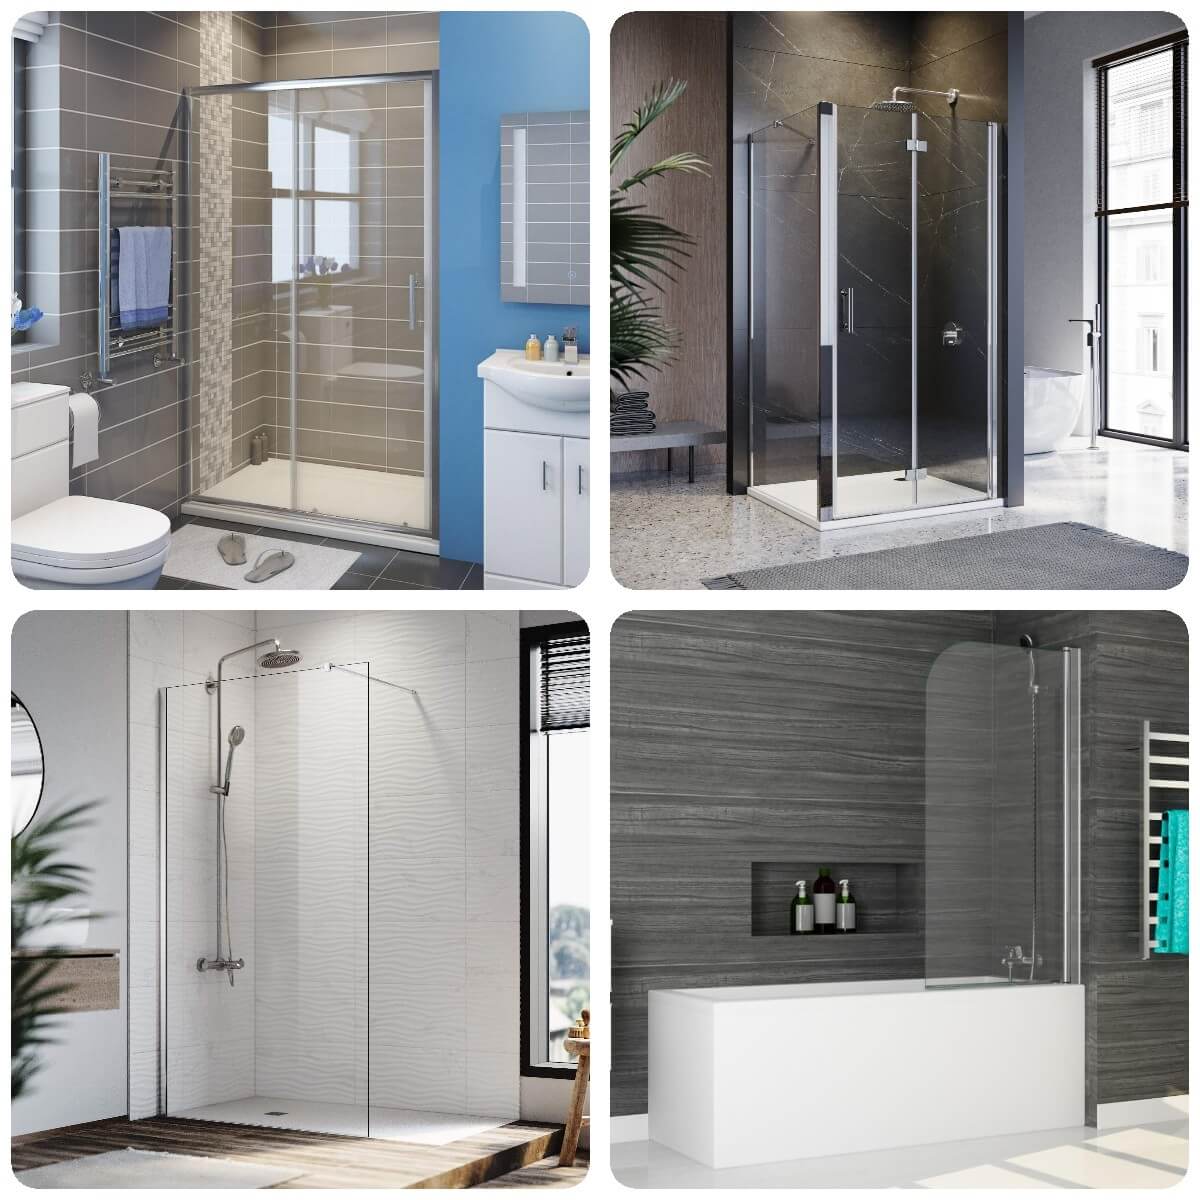 Shower Screen Buying Guide: Choose the Perfect Screen for Your Bathroom!